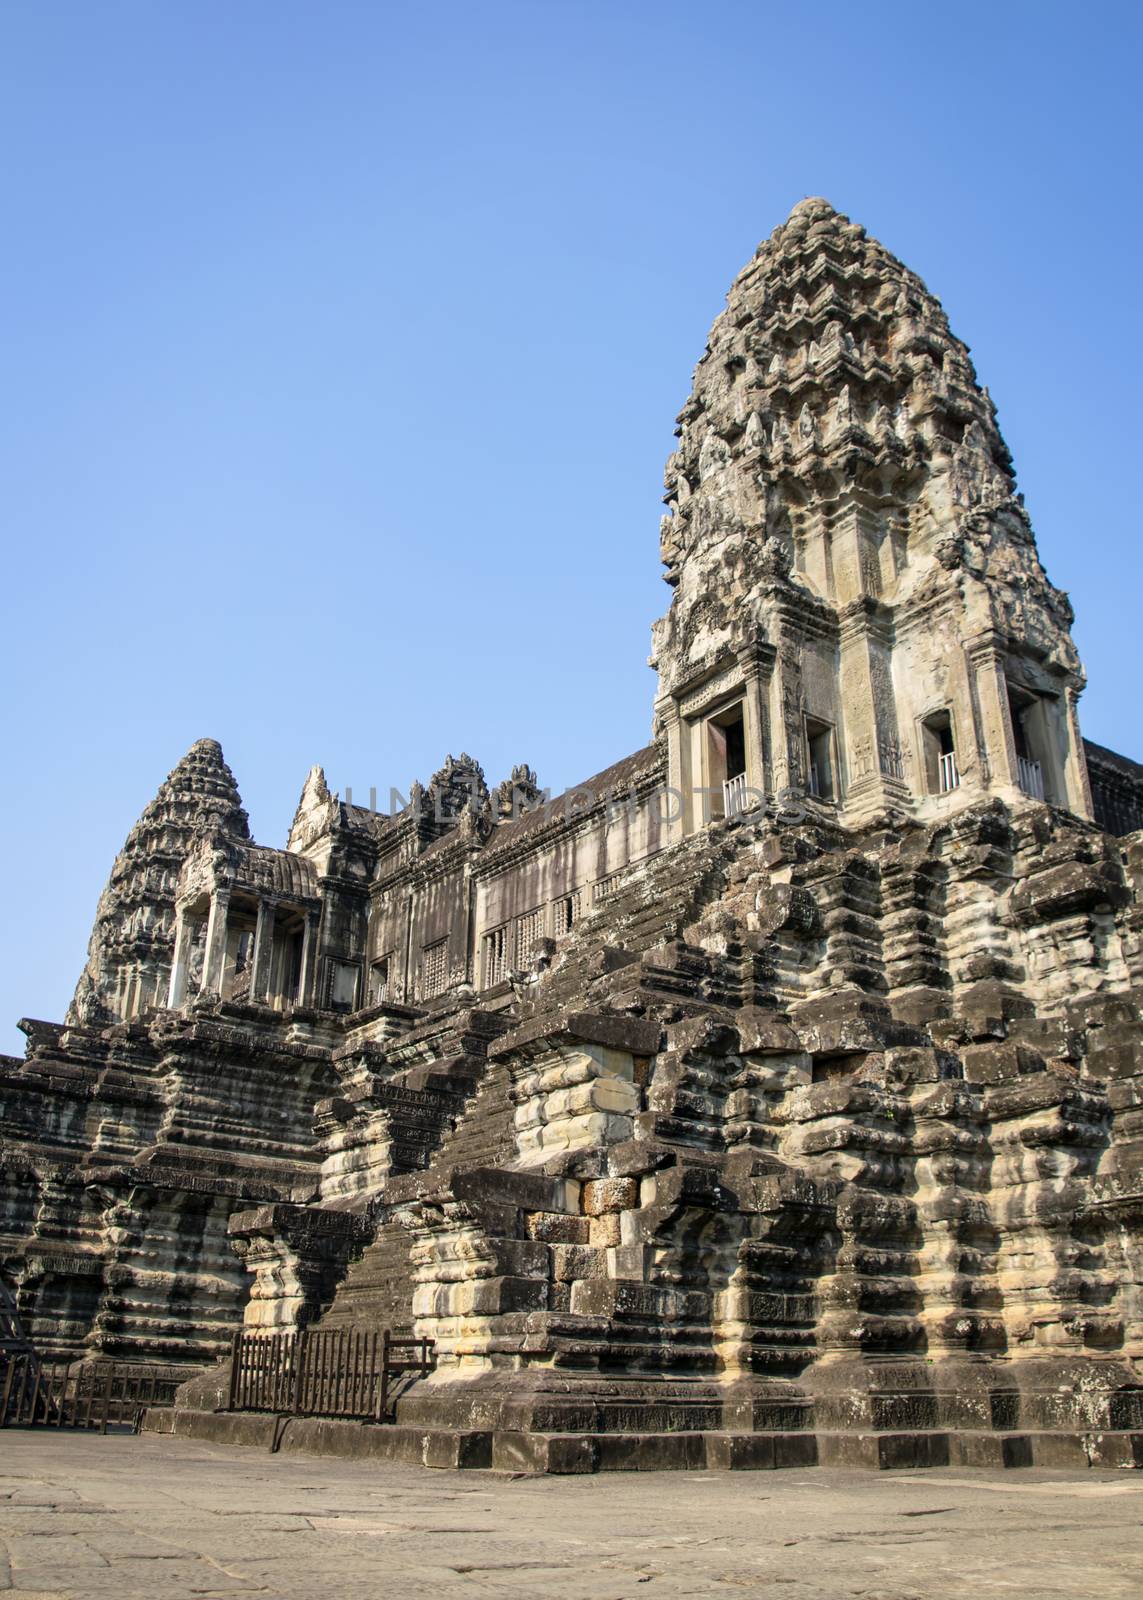 Angkor Wat, Cambodia - March 2016: View of the main temple at Angkor wat. Originally constructed in the early 12th century, the ruins are a huge tourist attraction as well as a place of worship today